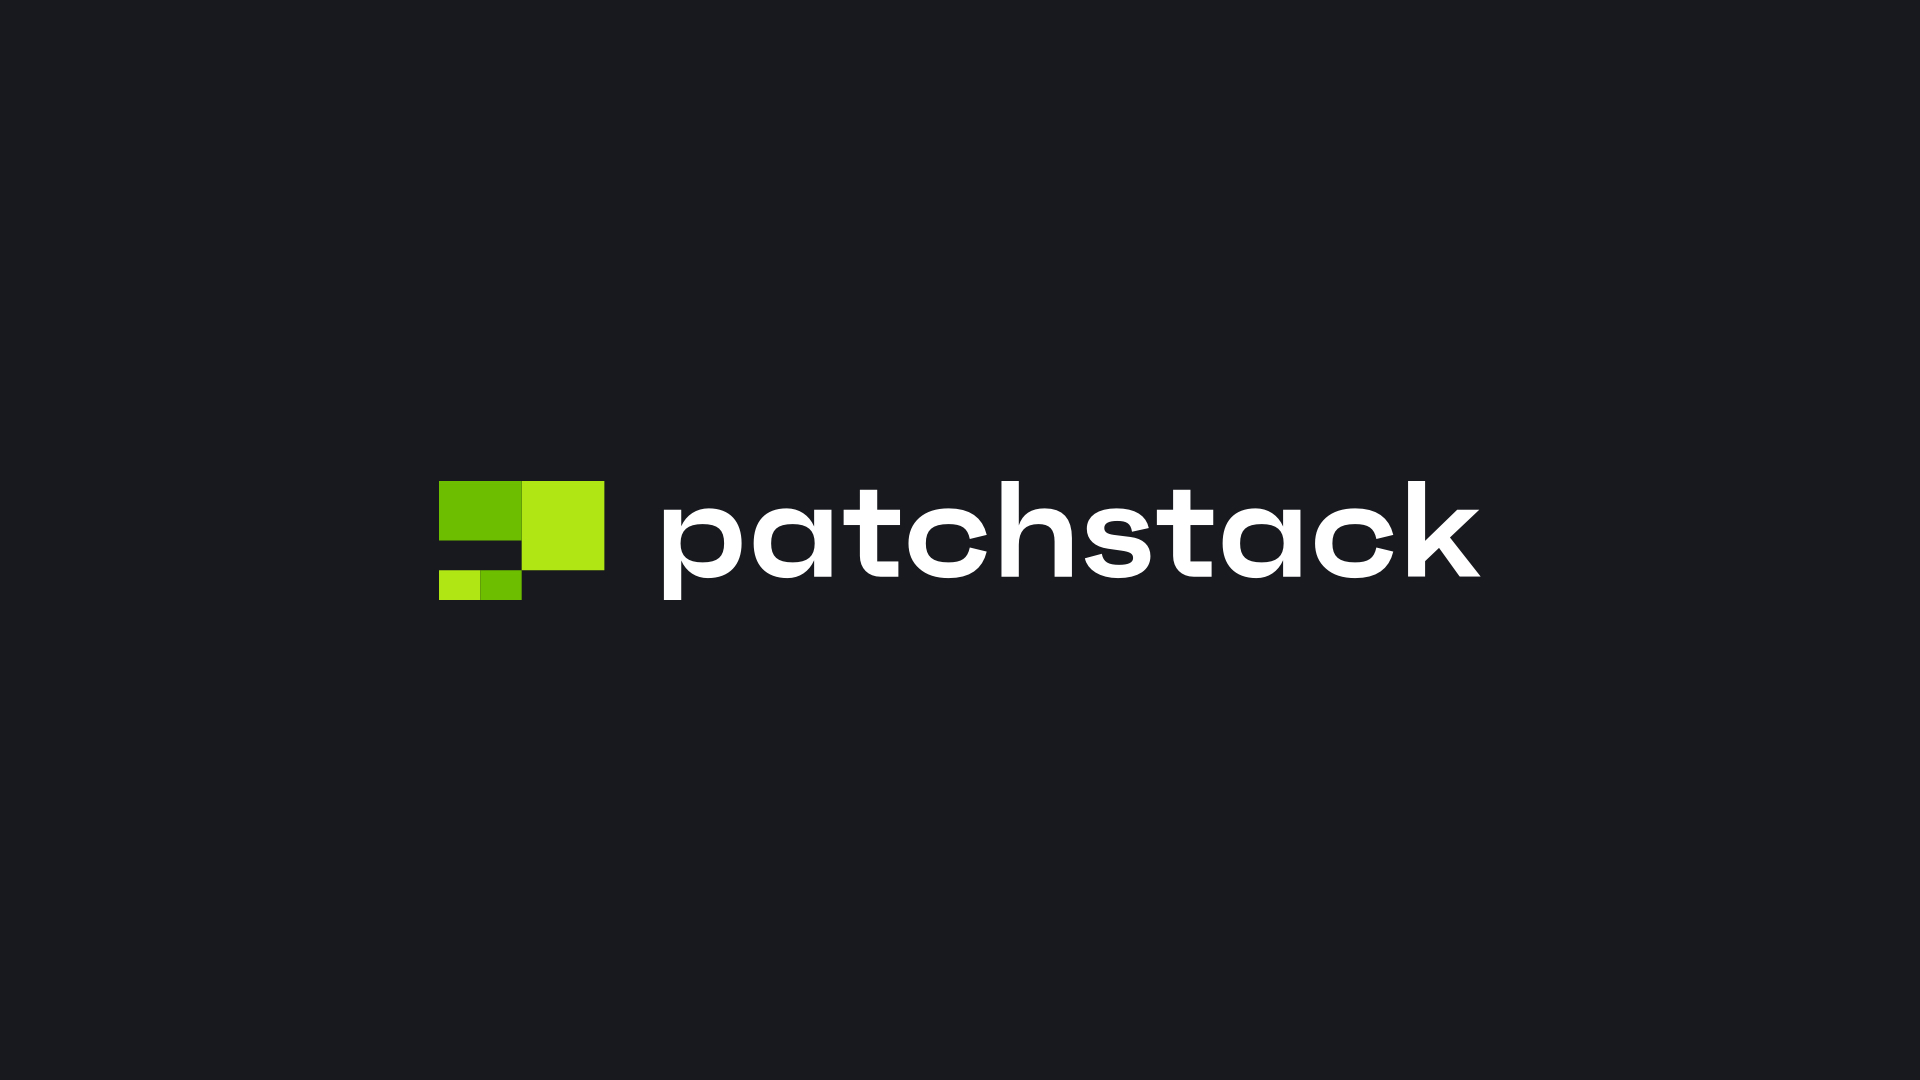 Patchstack Whitepaper: WordPress Ecosystem Records 150% Increase in Security Vulnerabilities in 2021